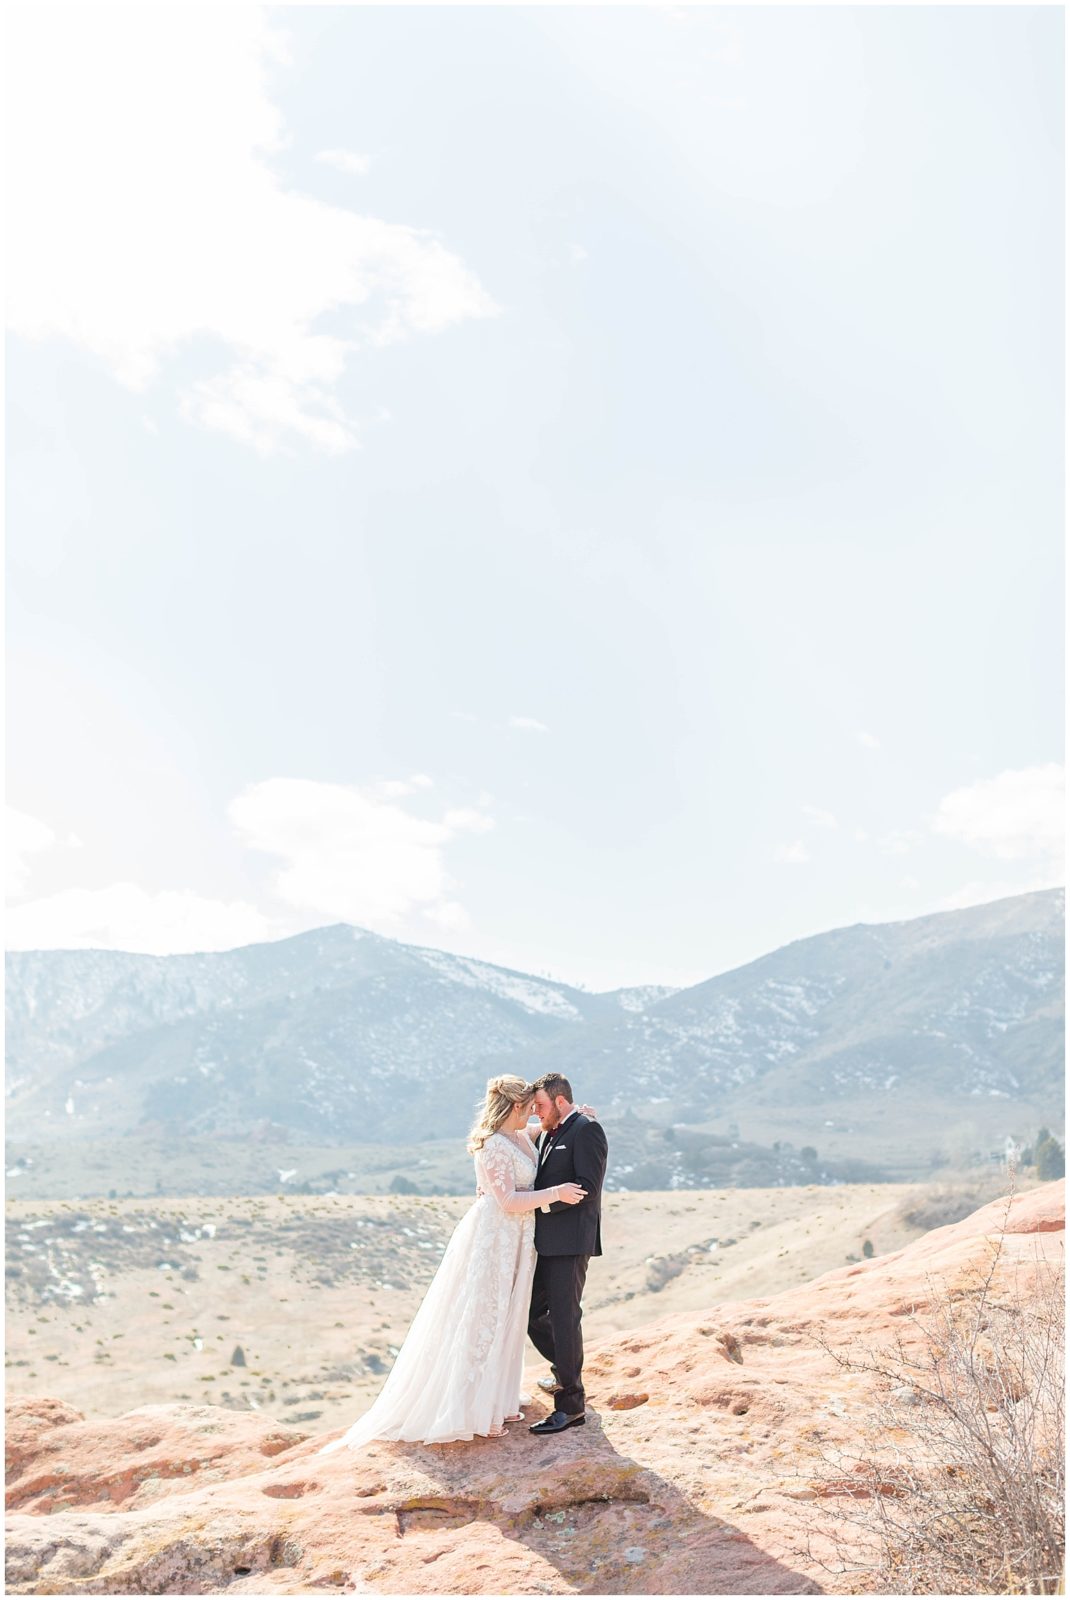 Bride and groom first look in the foothills by Jessica Brees, Littleton Wedding Photographer and Videographer